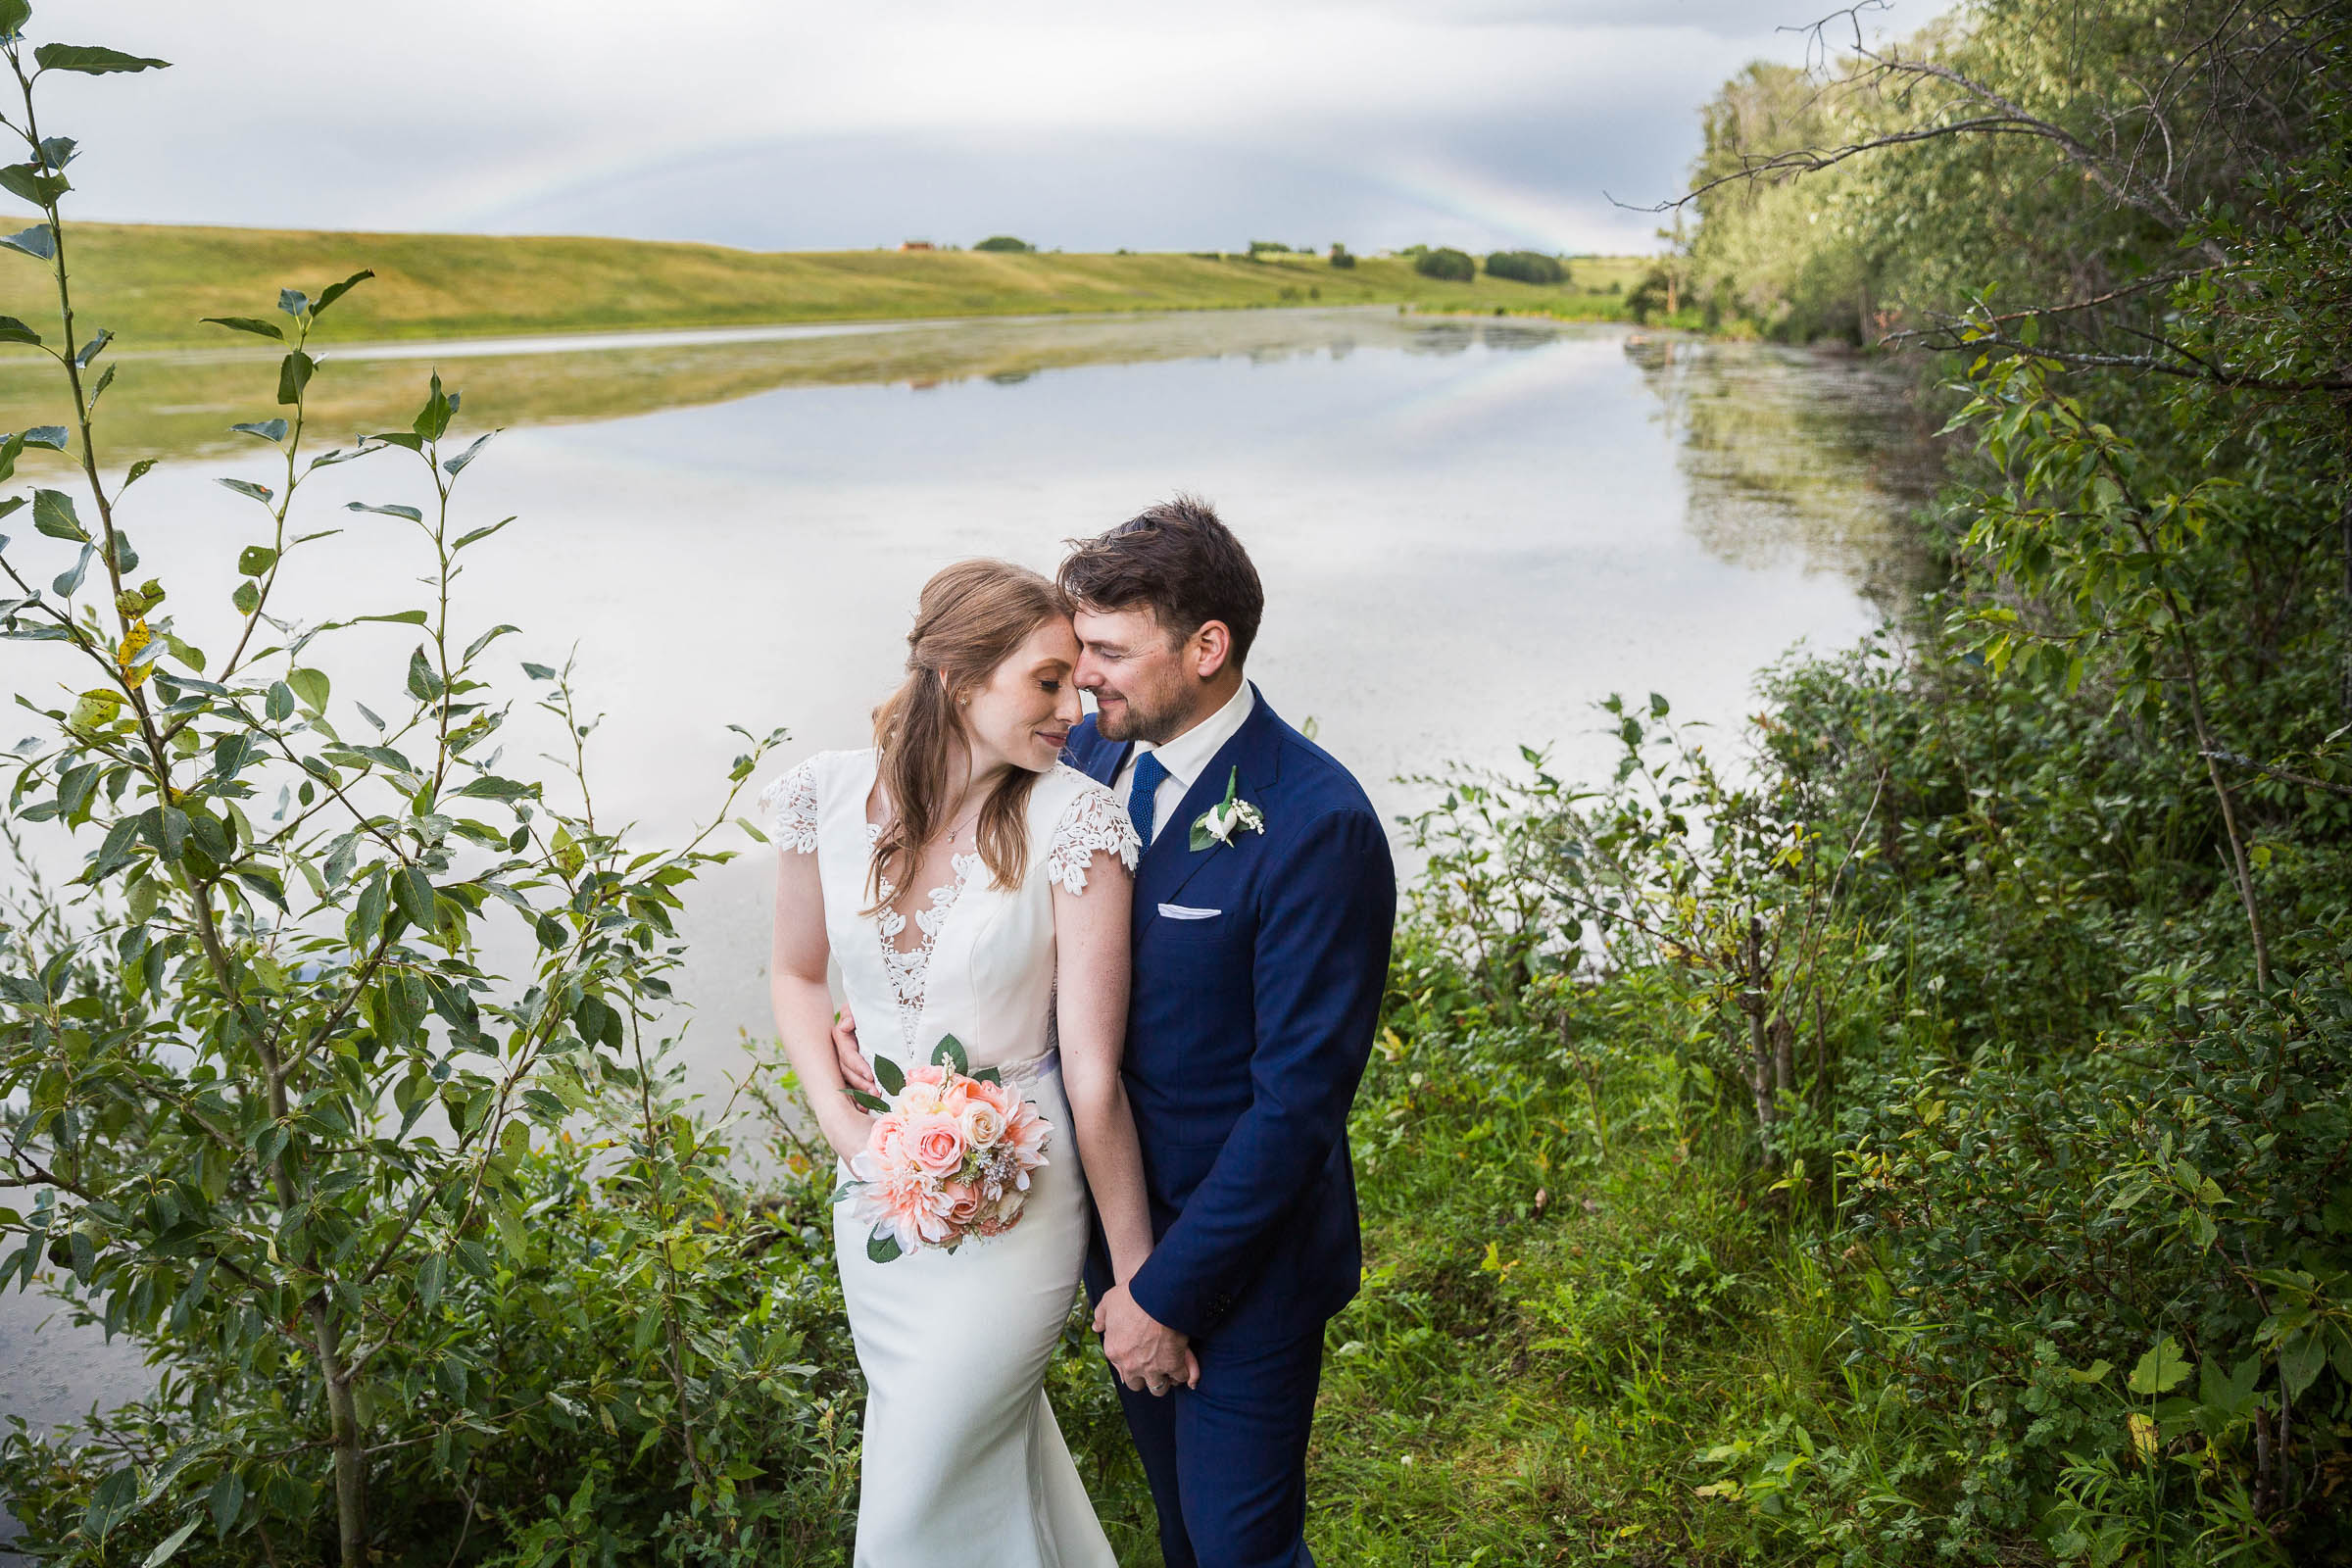 Bride and groom embracing infront of small pond